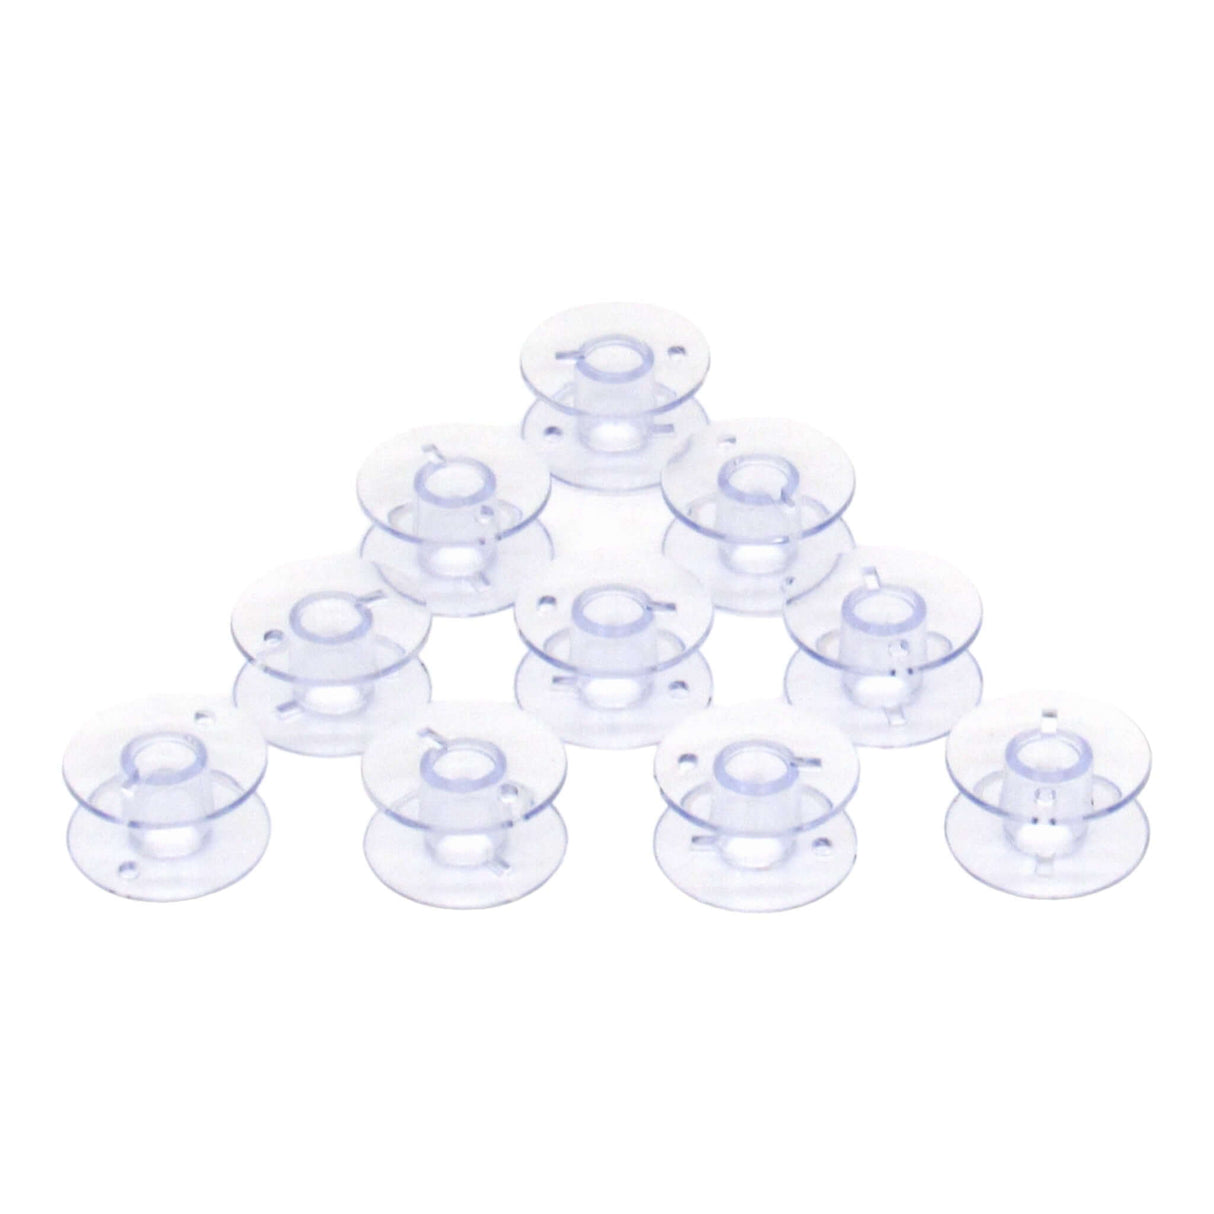 (10) Plastic One Piece Bobbins - Brother Part # X52800150T - Central Michigan Sewing Supplies